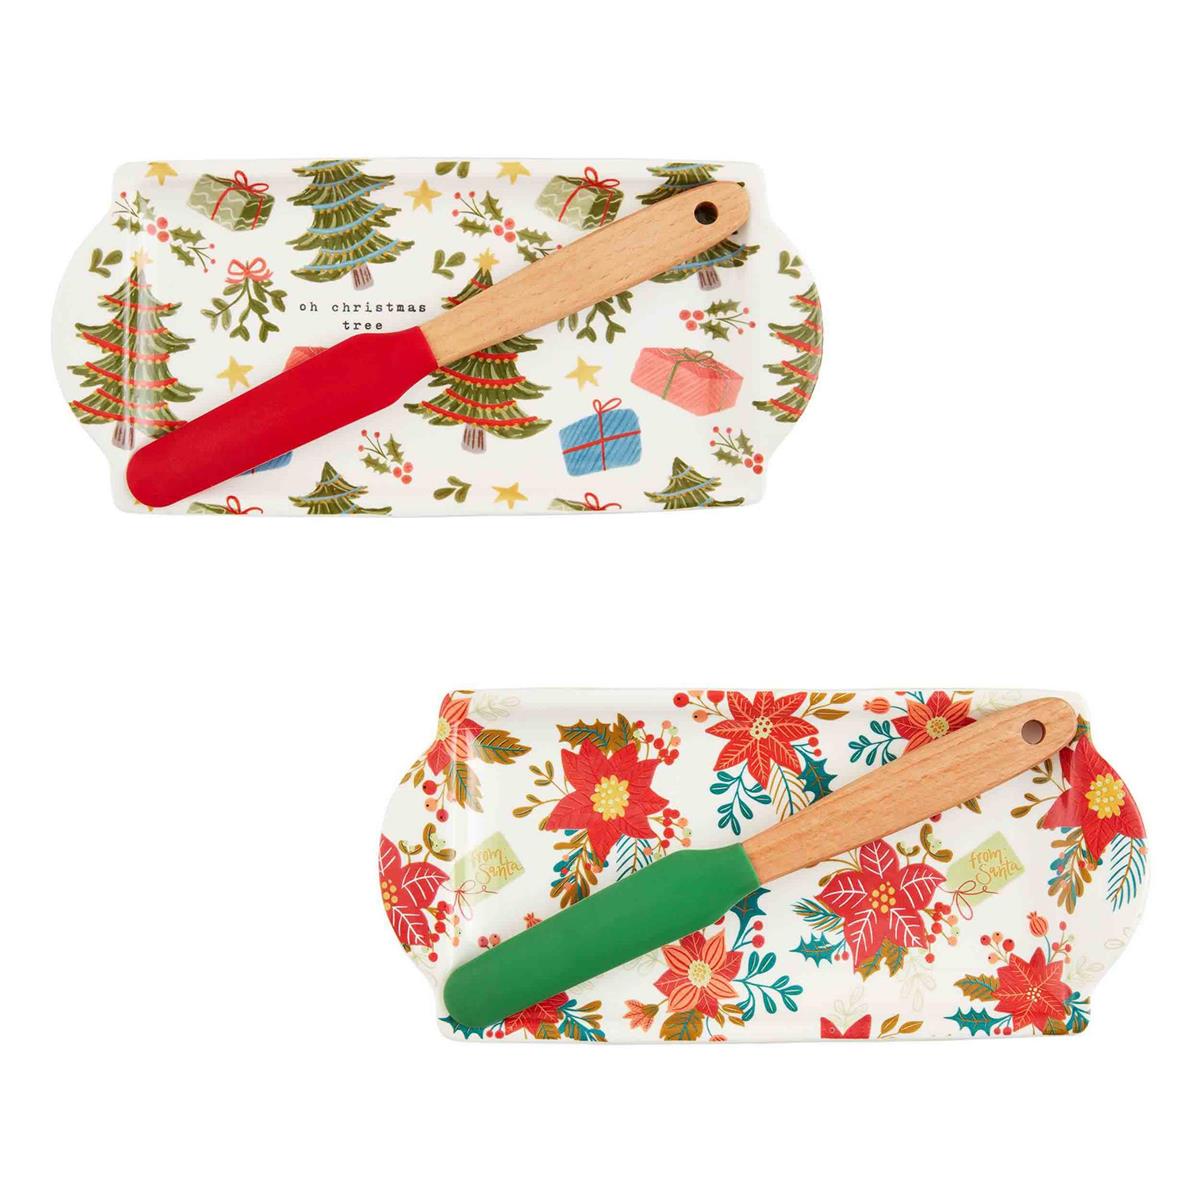 both styles of christmas pattern everything dish and spreader sets displayed against a white background